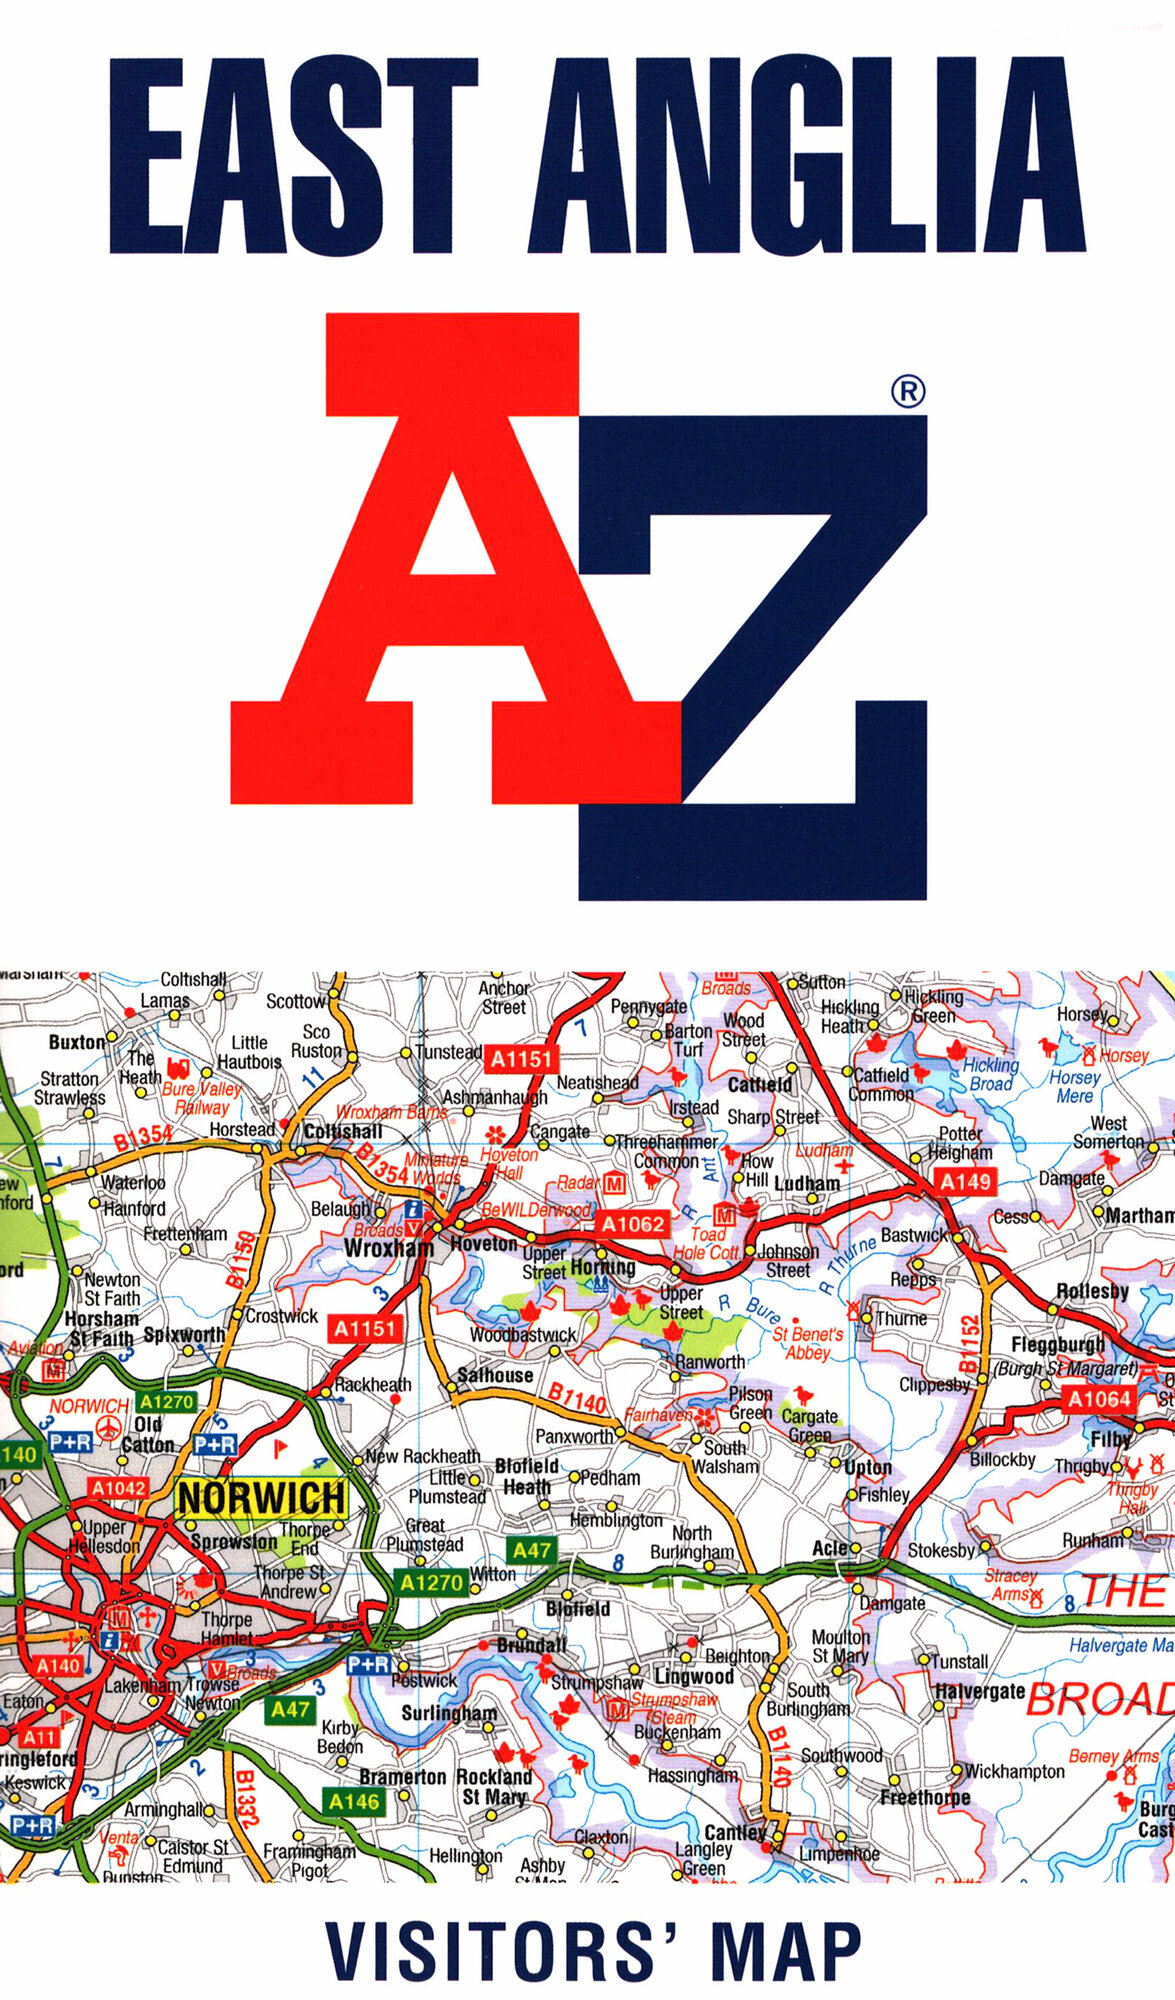 East Anglia A-Z Visitors' Map